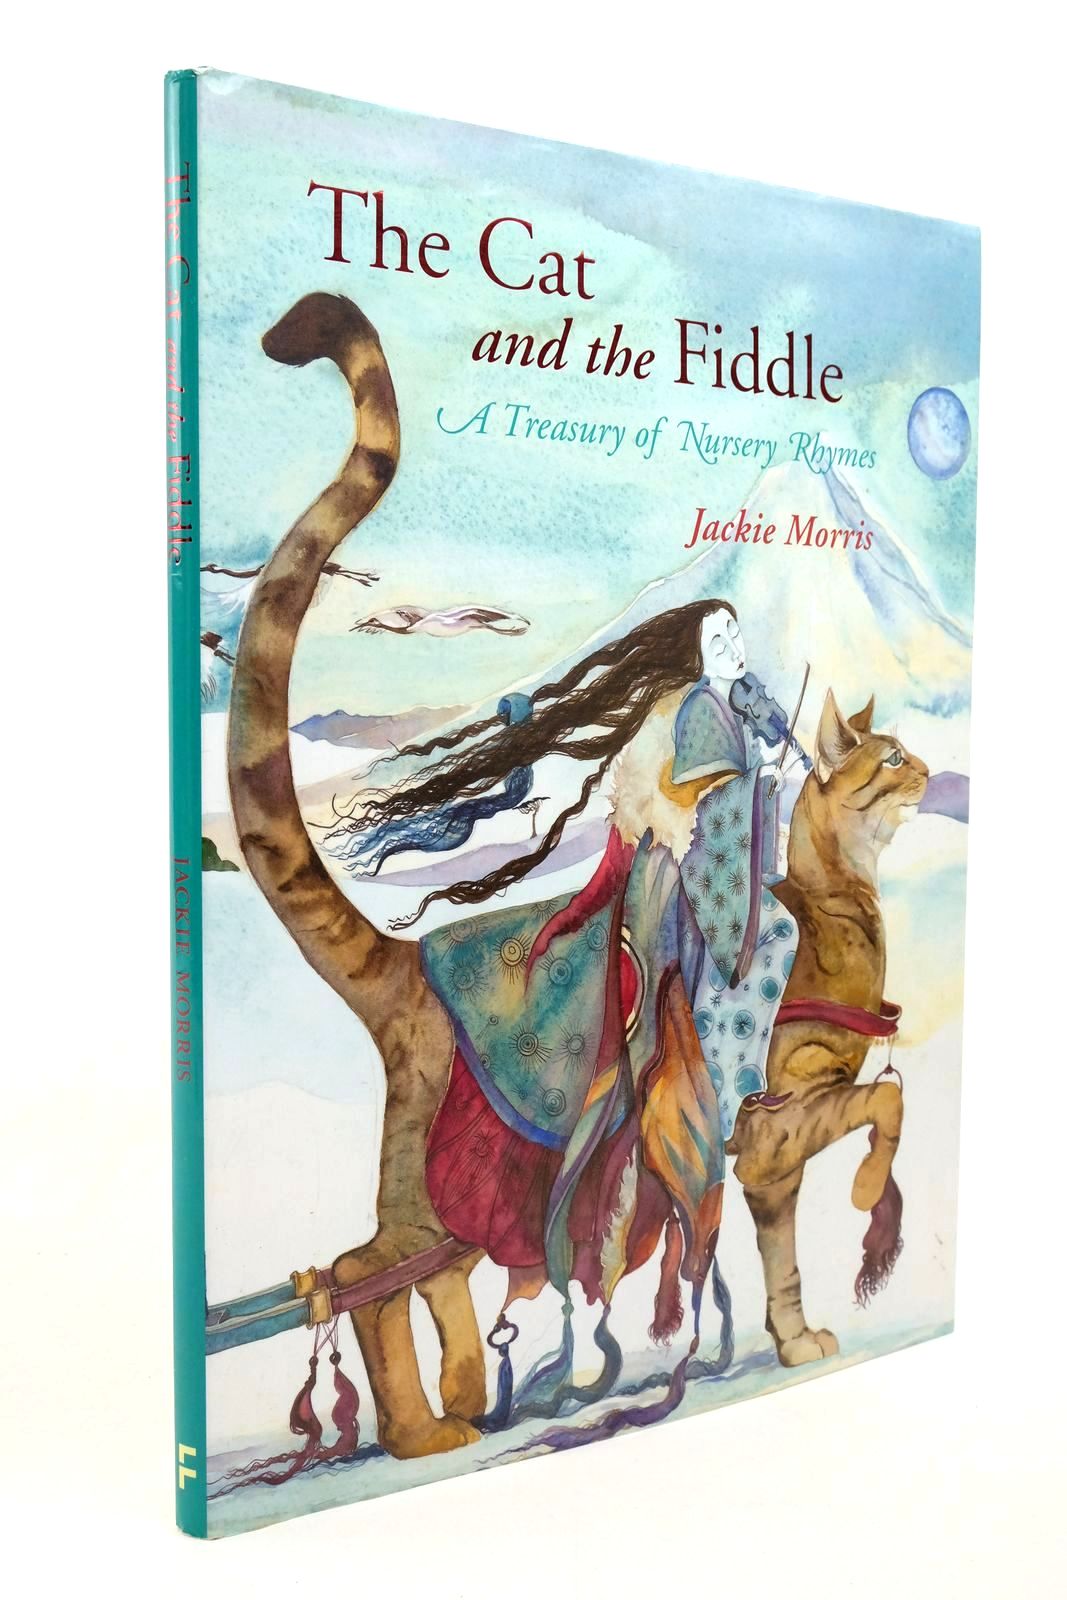 Photo of THE CAT AND THE FIDDLE - A TREASURY OF NURSERY RHYMES illustrated by Morris, Jackie published by Frances Lincoln Children's Books (STOCK CODE: 1322758)  for sale by Stella & Rose's Books